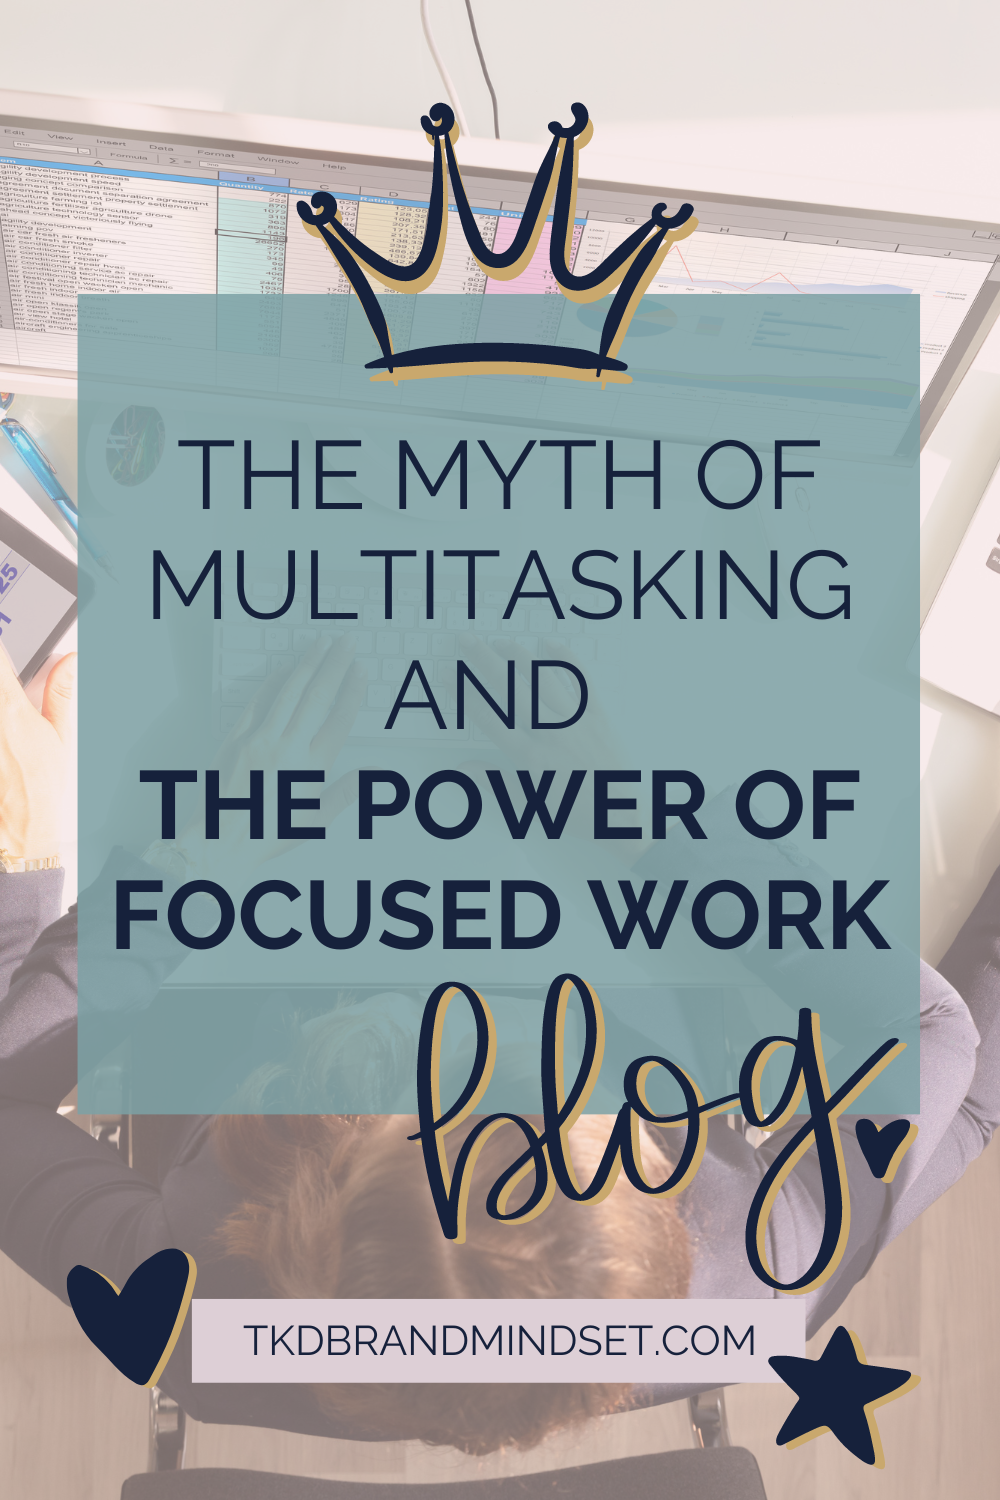 The Myth of Multitasking and the Power of Focused Work